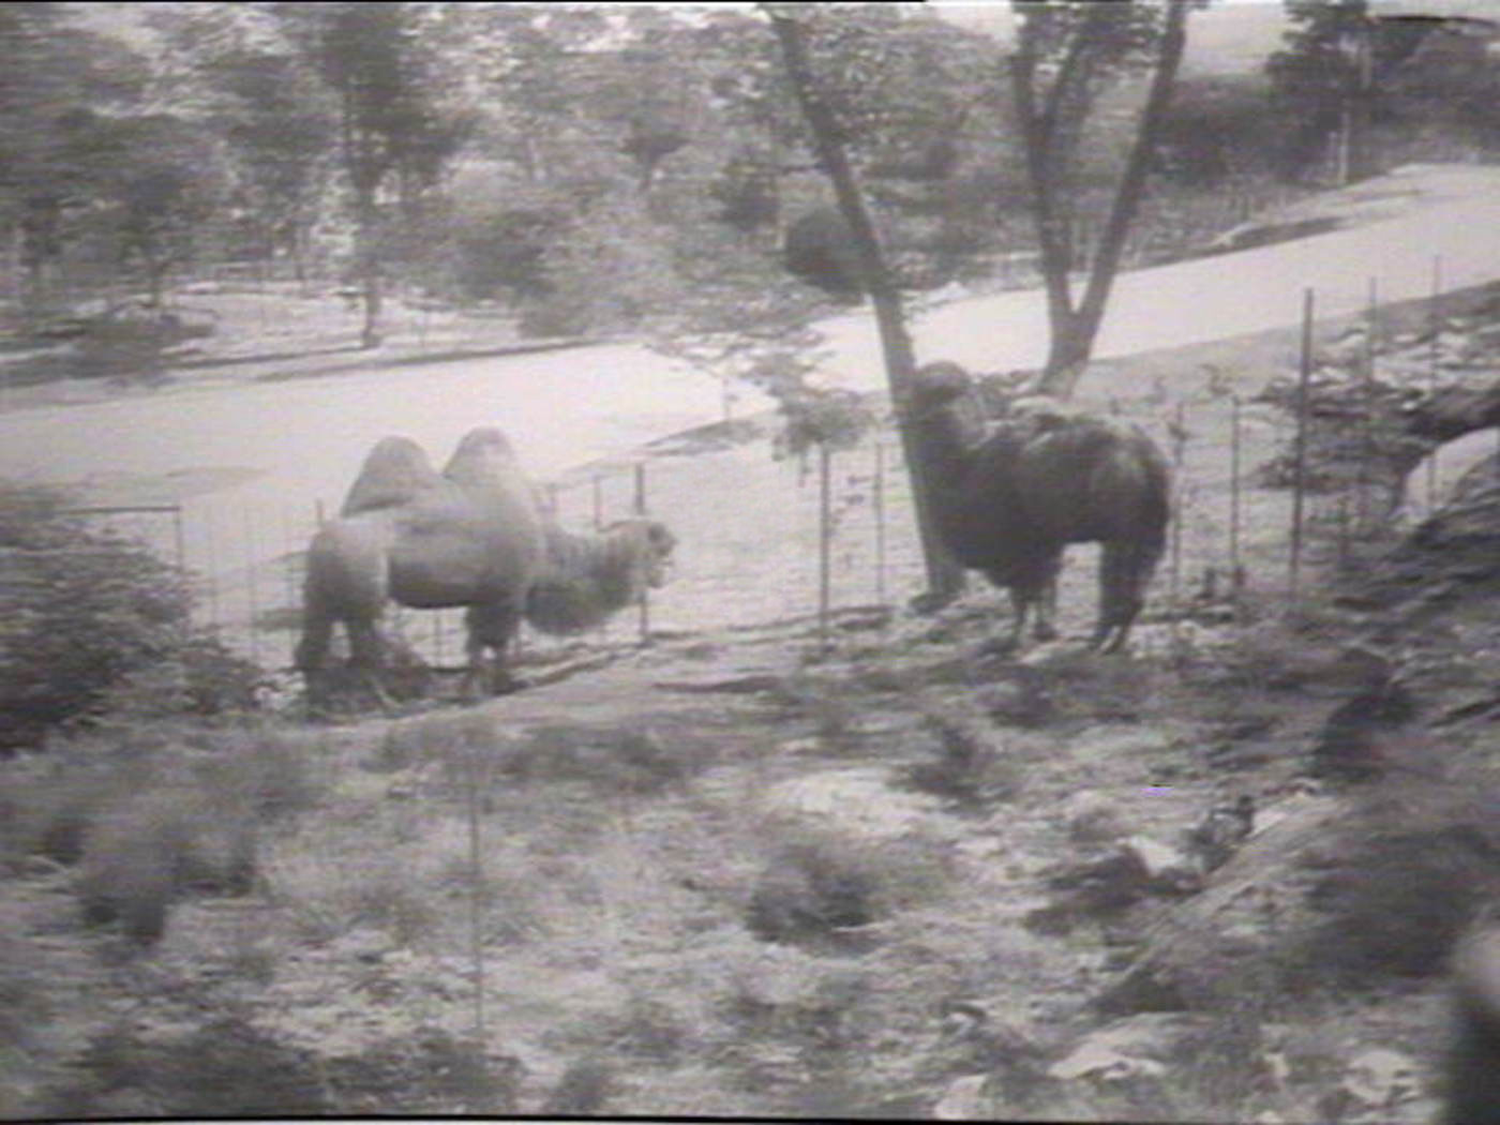 Archival image of two camels digitally altered to remove a portion of fence